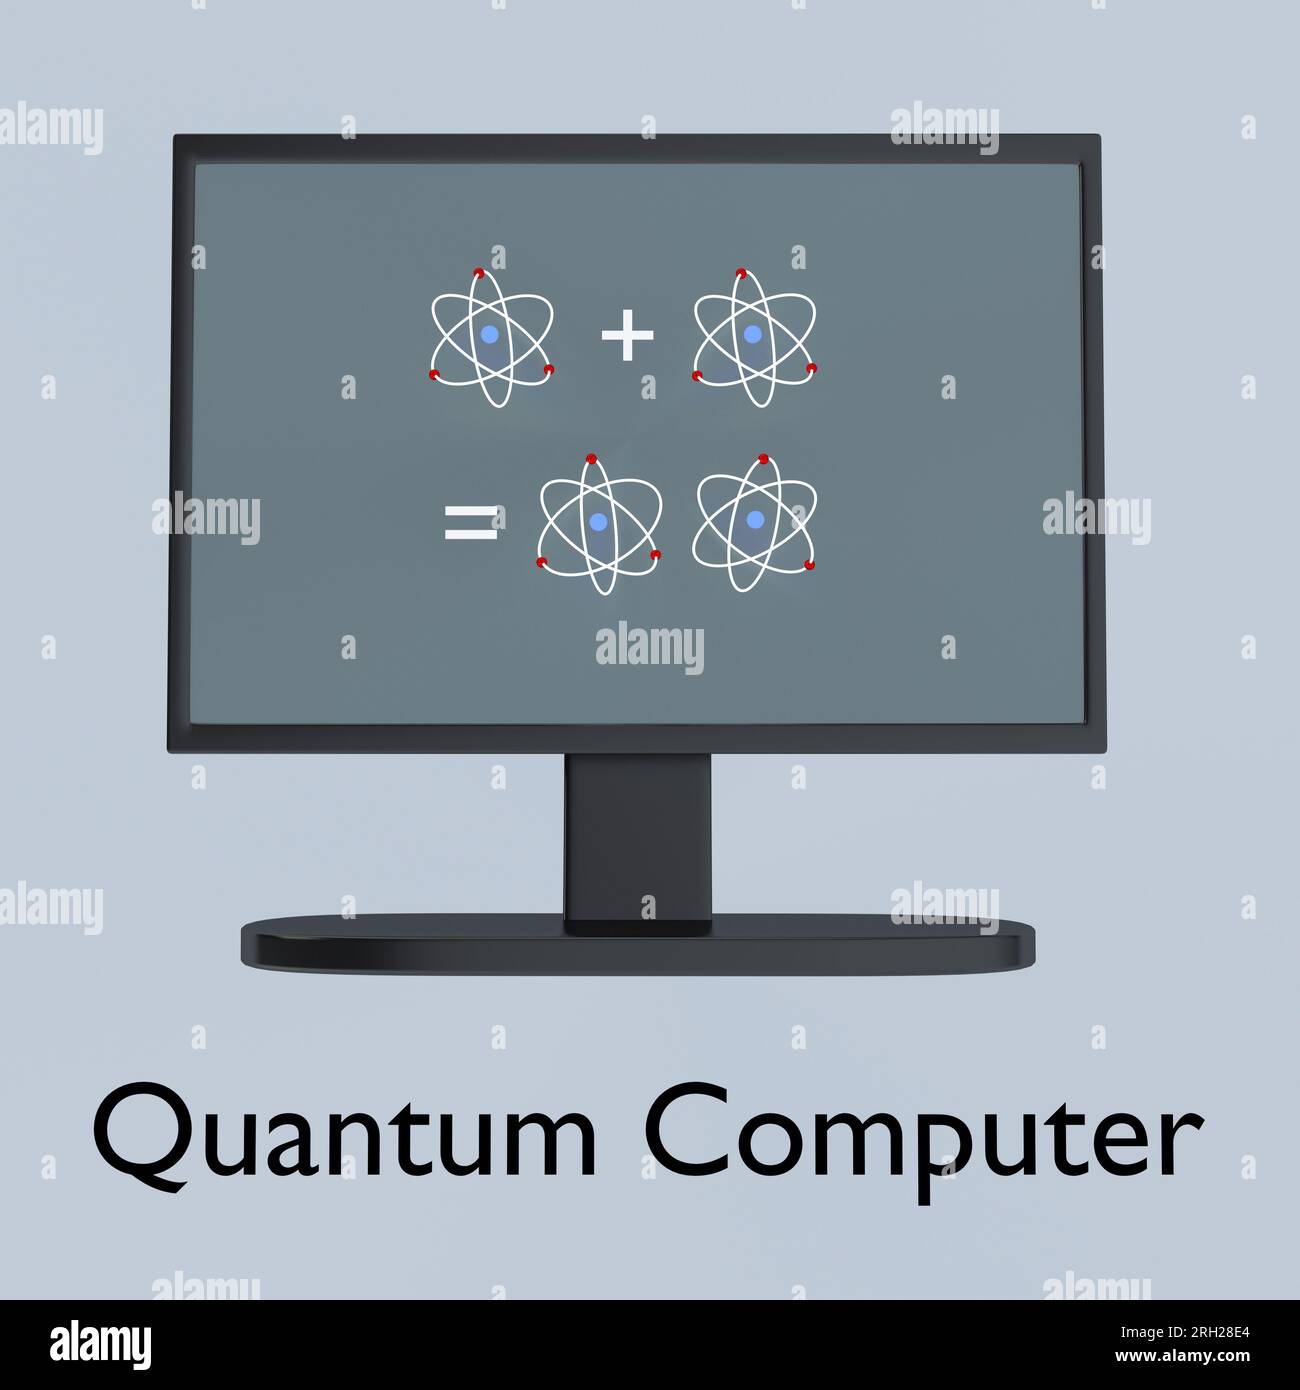 3D illustration of a PC screen displaying a symbolic equation containing atoms, titled as Quantum Computer. Stock Photo